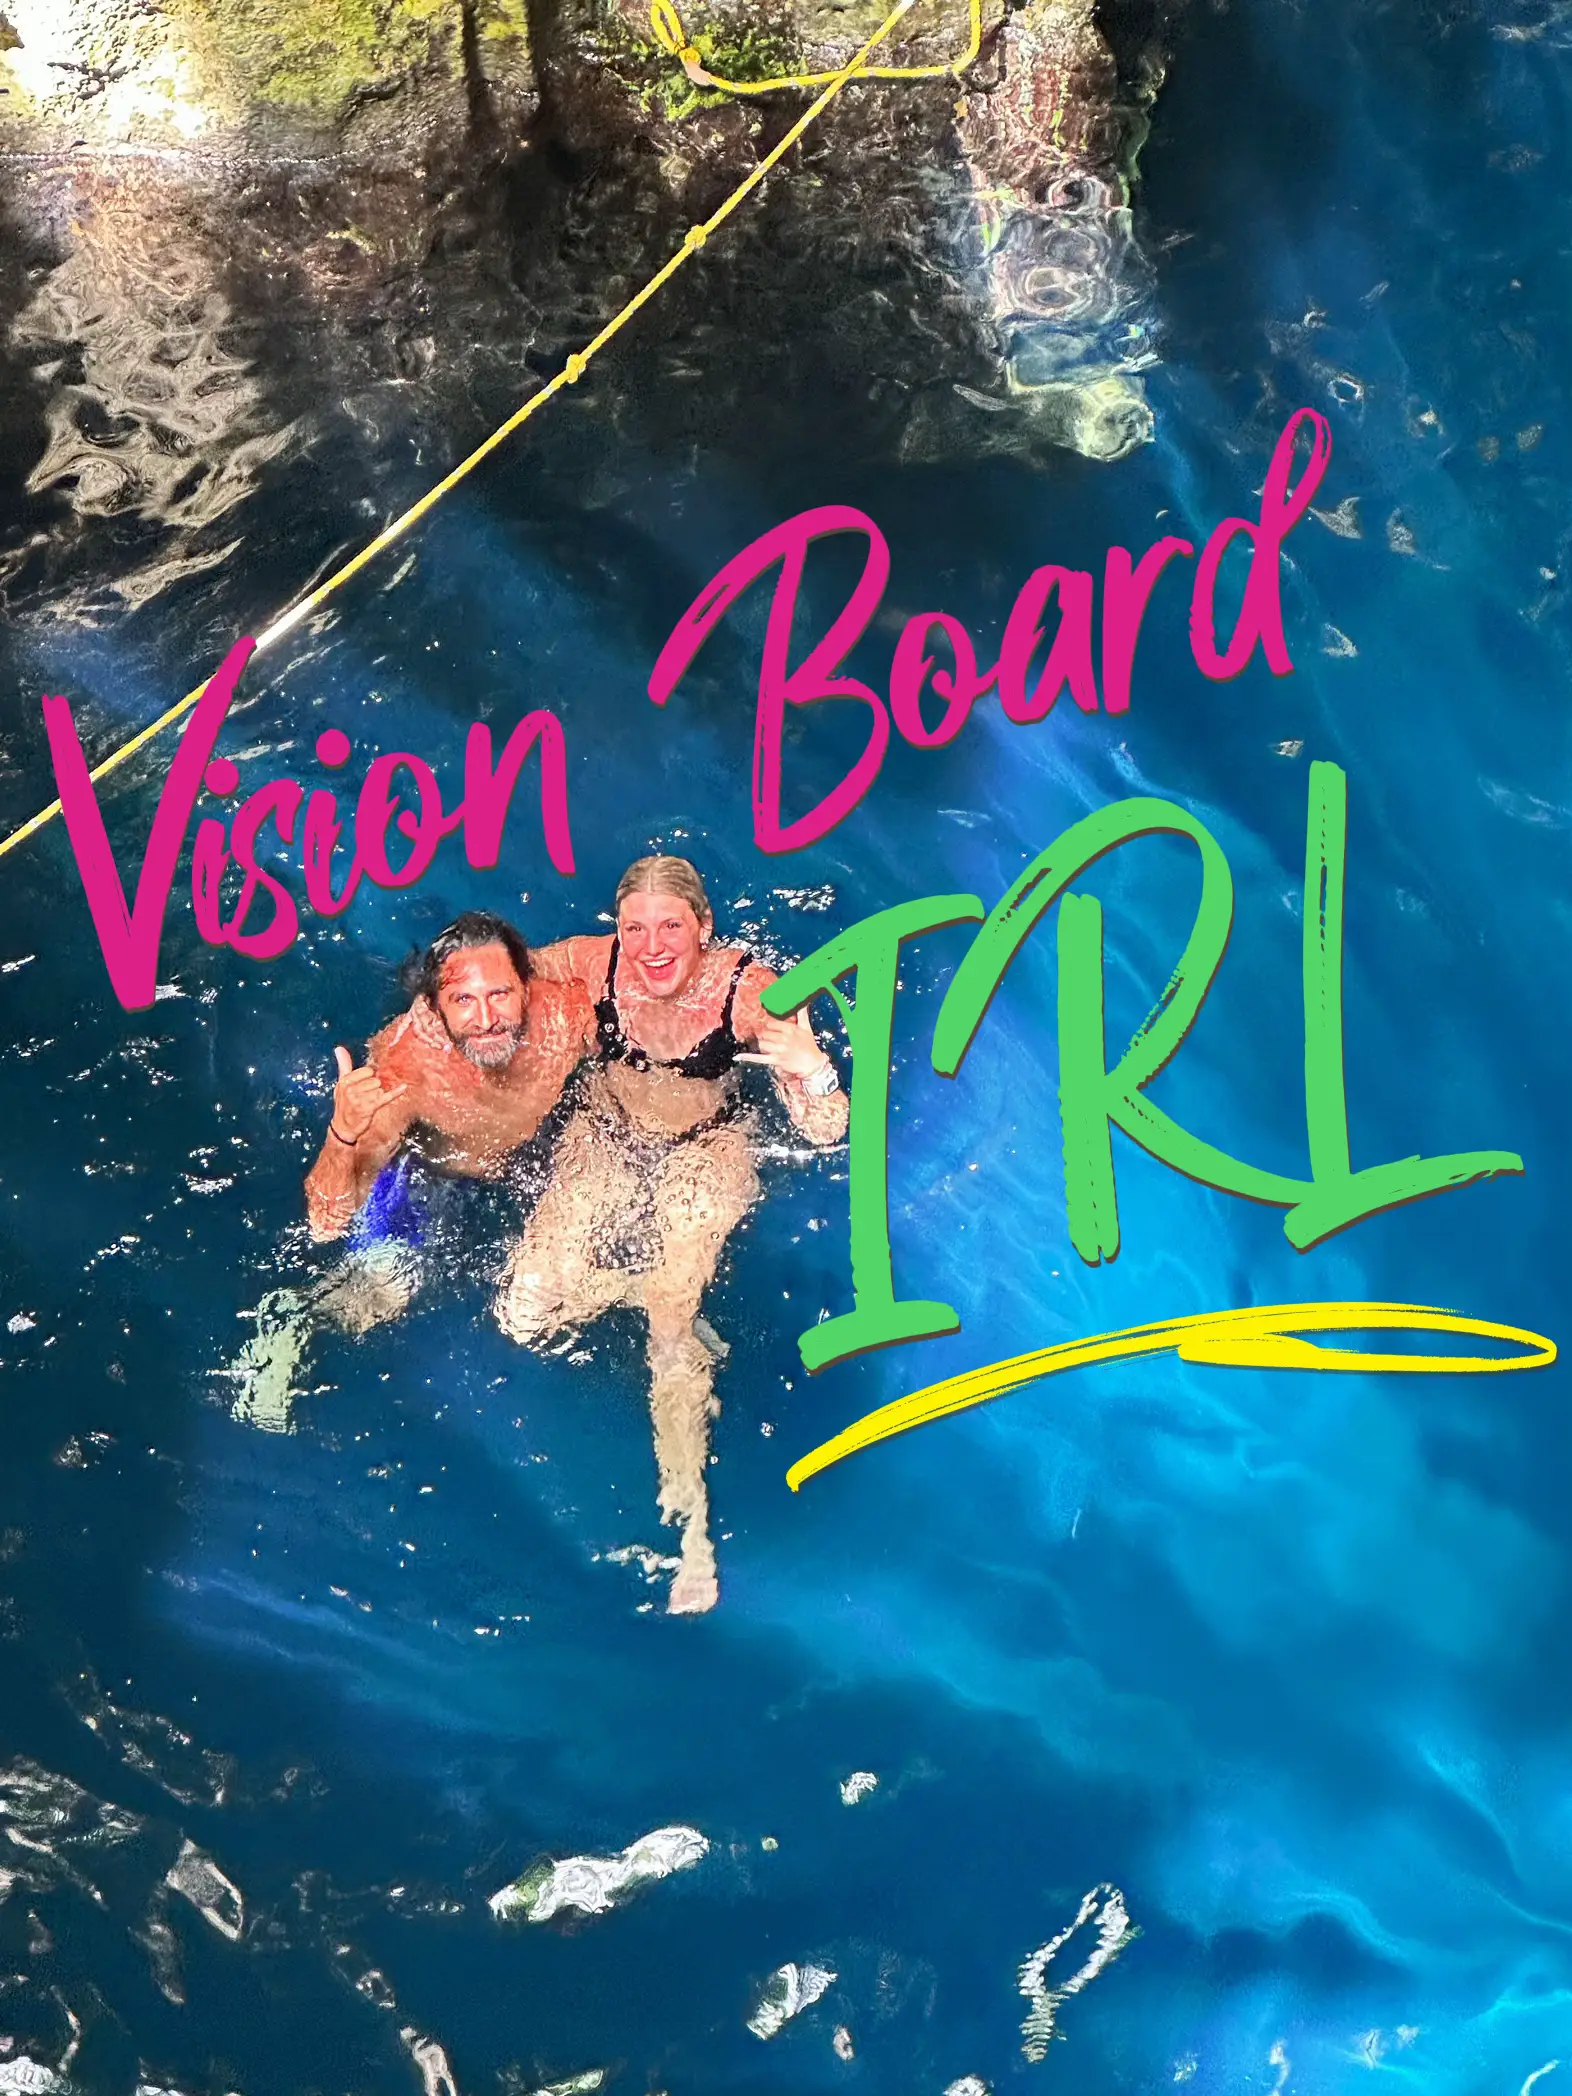  Two people are in the water on a board.